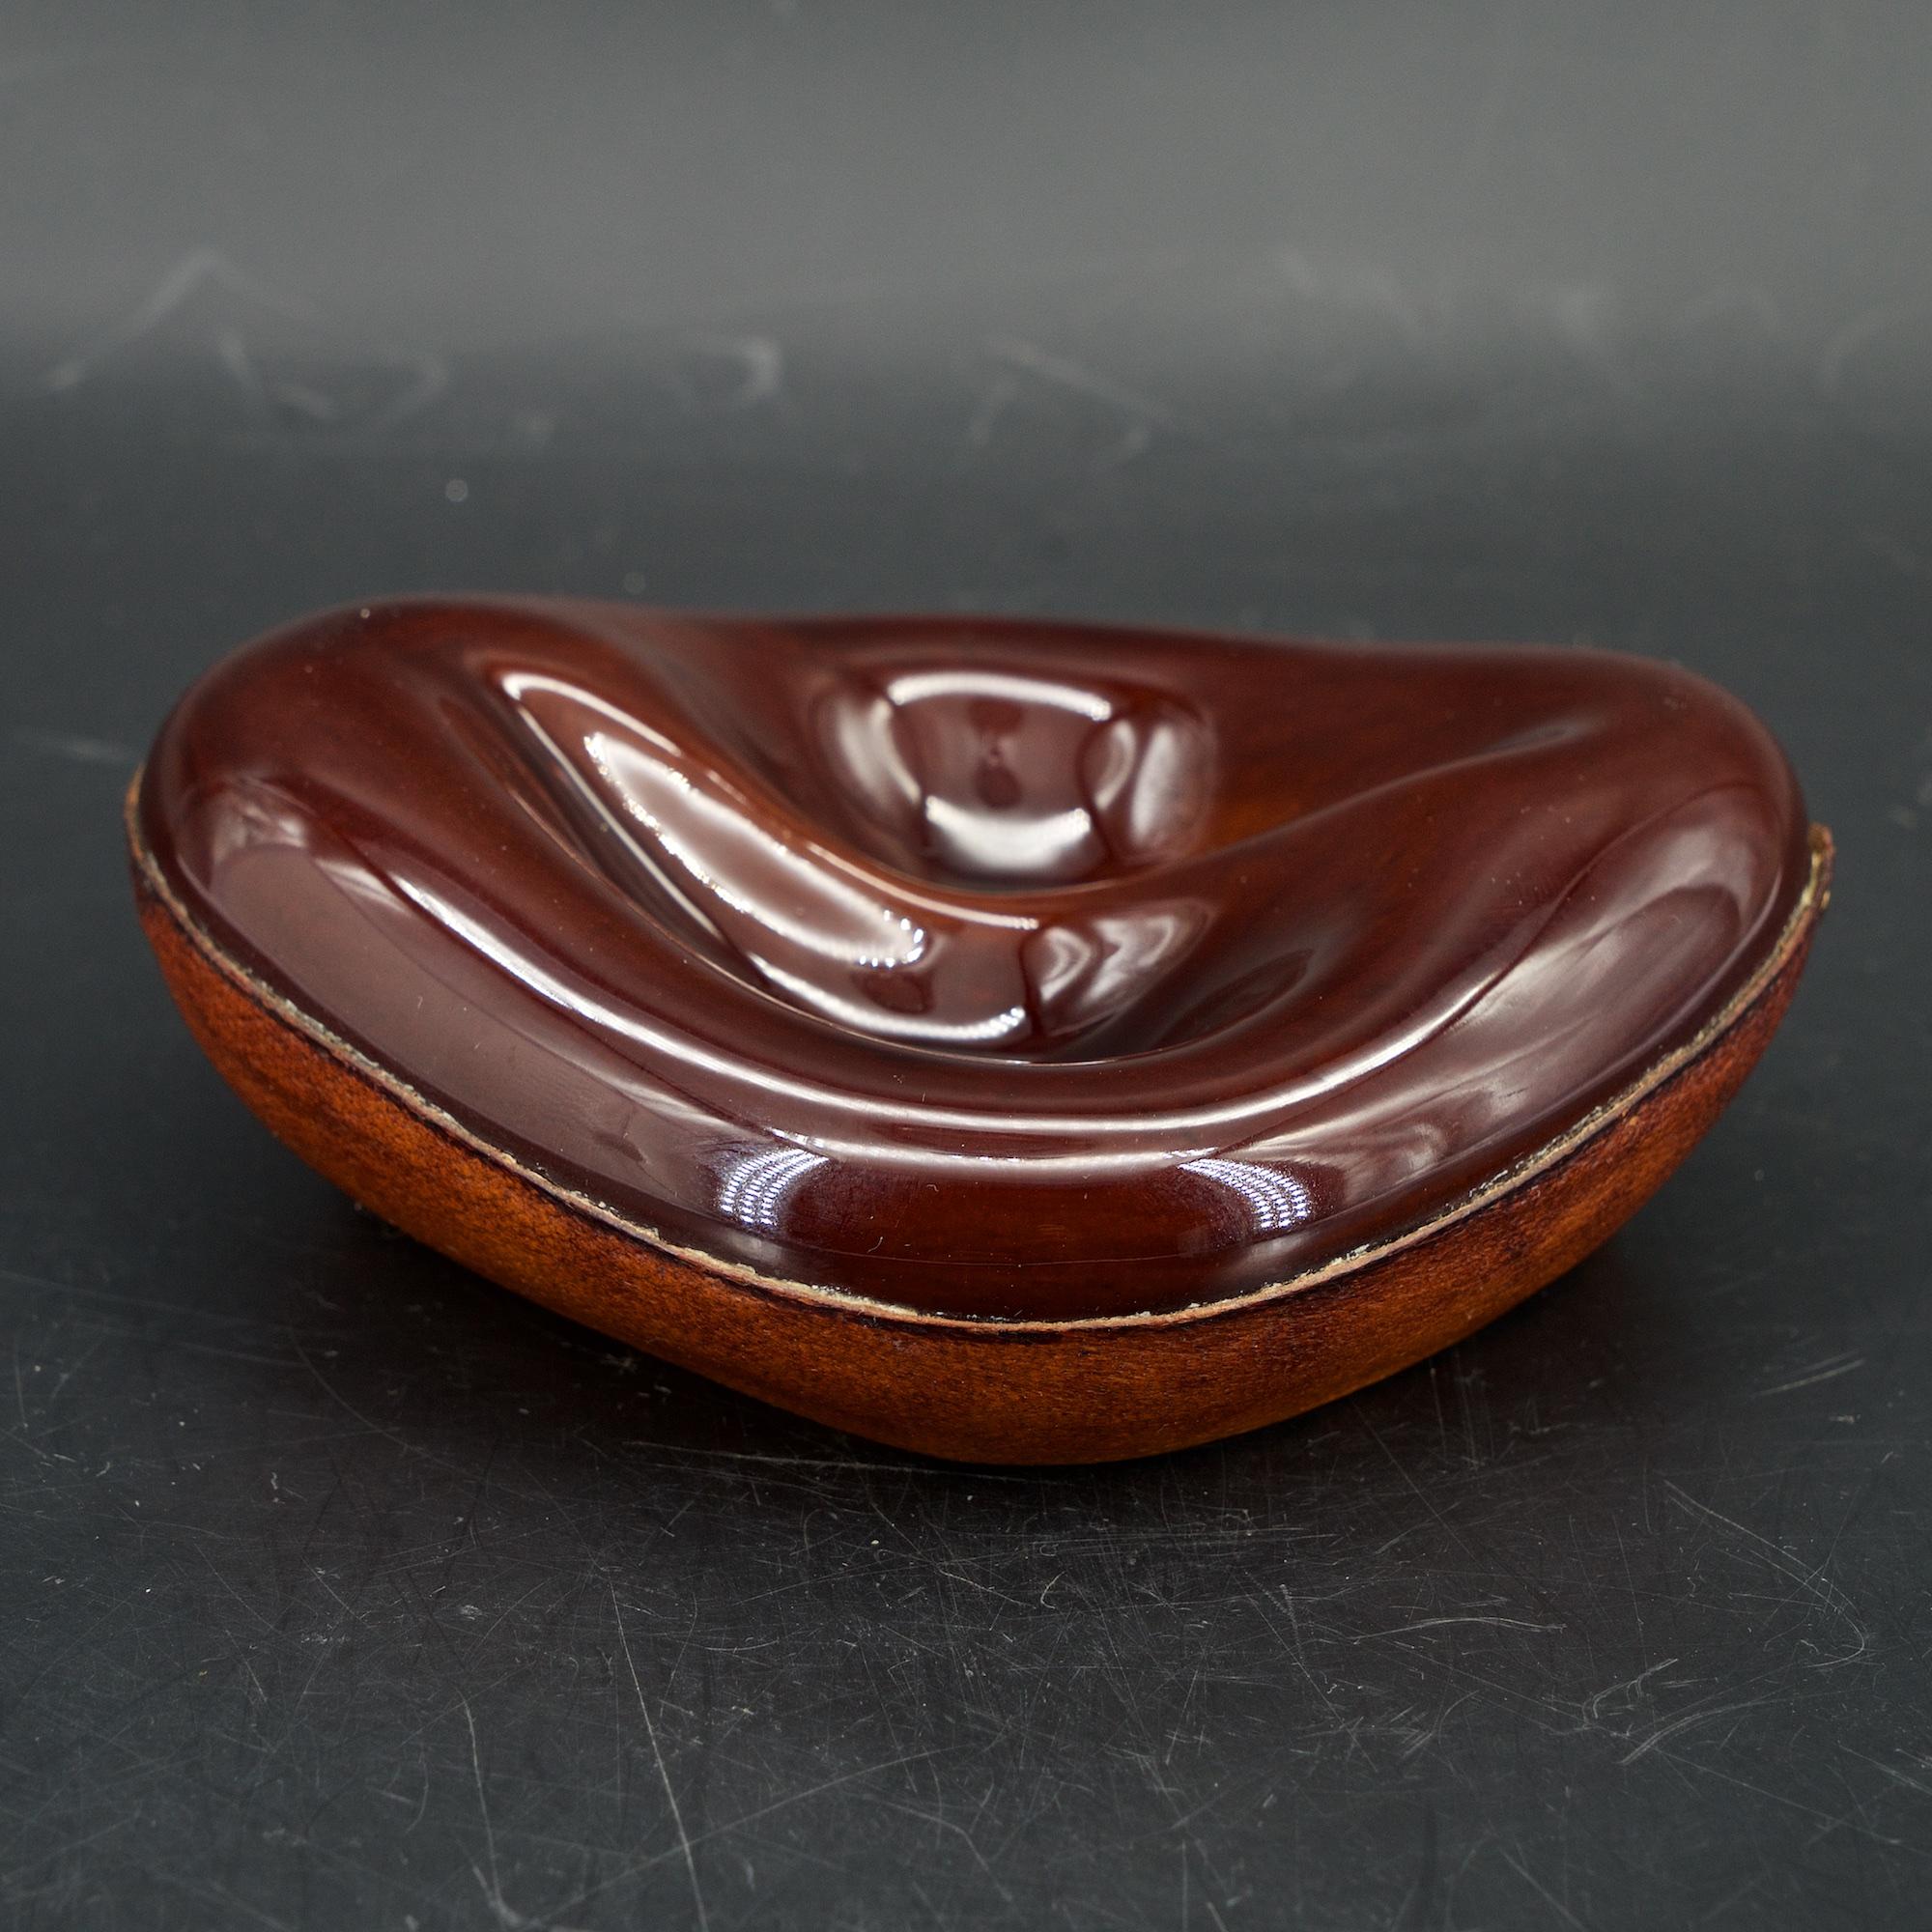 Molded Georges Jouve Ceramic Pipe Rest Ashtray Organic Dish Bowl French Modernism